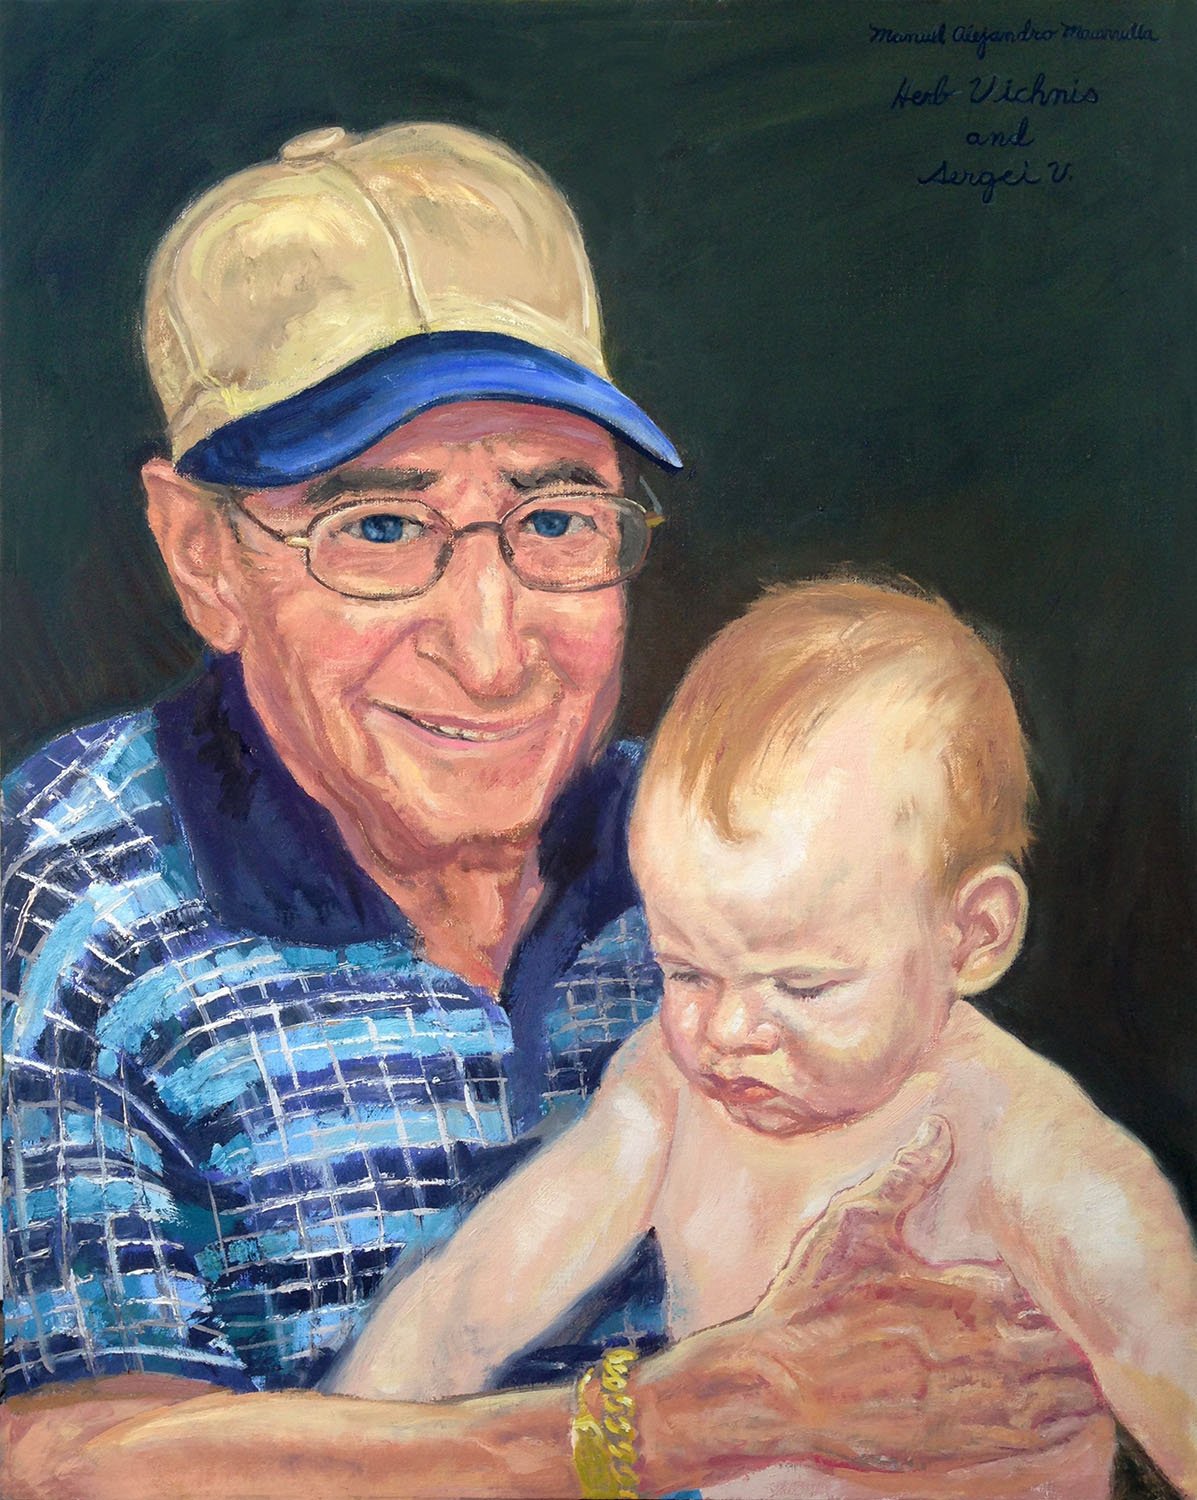    Mr. Herb Vichnis and Grandson Sergei,   2017.  Oil on canvas. 30” X 24”.  (Private collection.) 